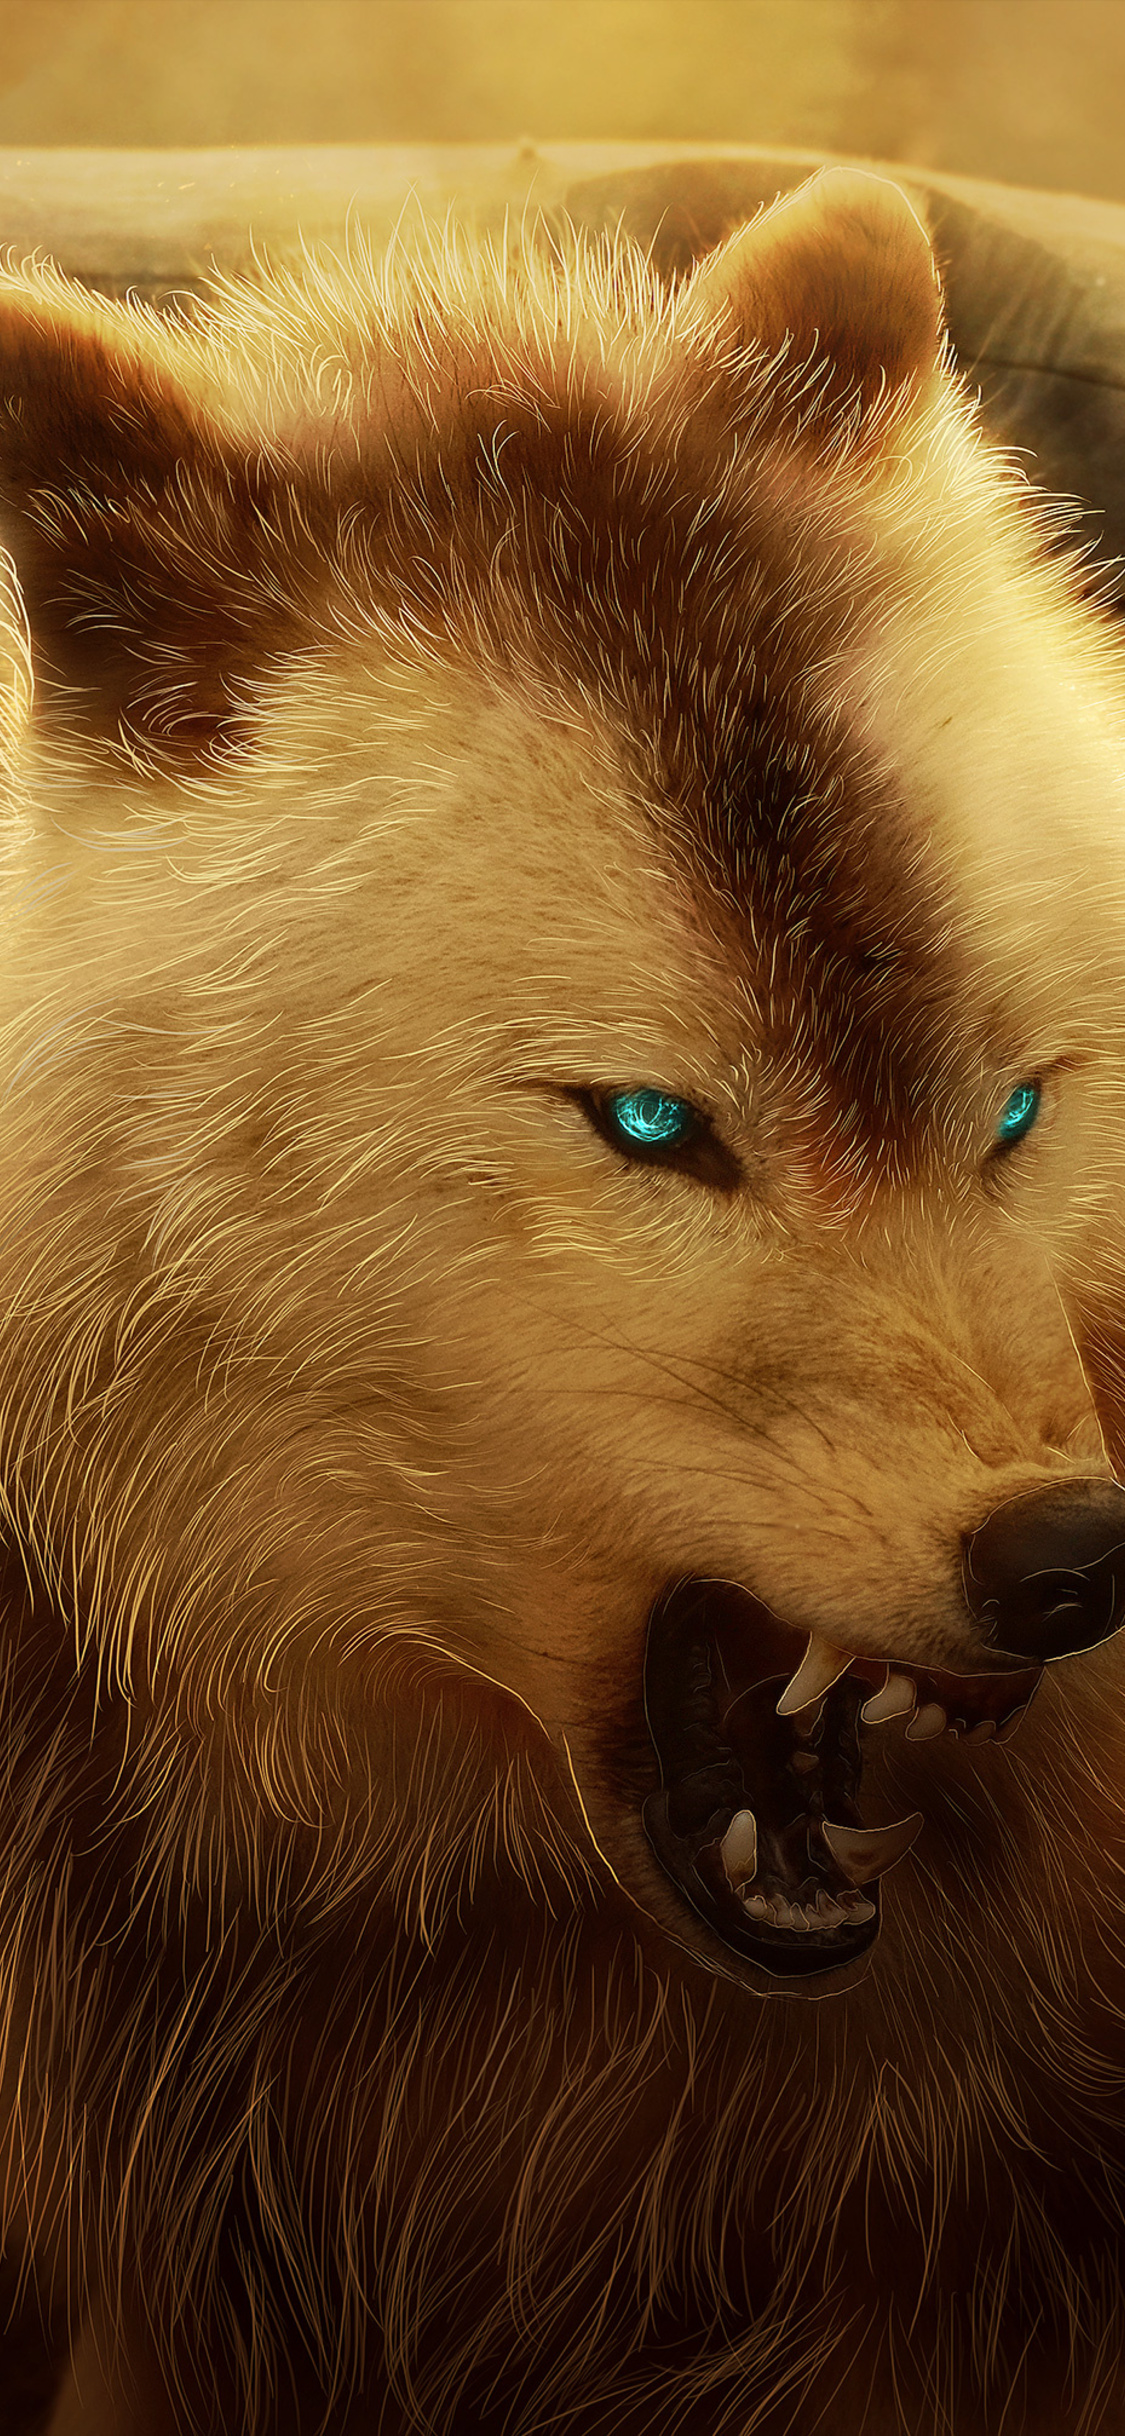 Angry Wolf Wallpapers 1920x1080  Wolfwallpaperspro  Wolf wallpaper Angry  wolf Angry wallpapers